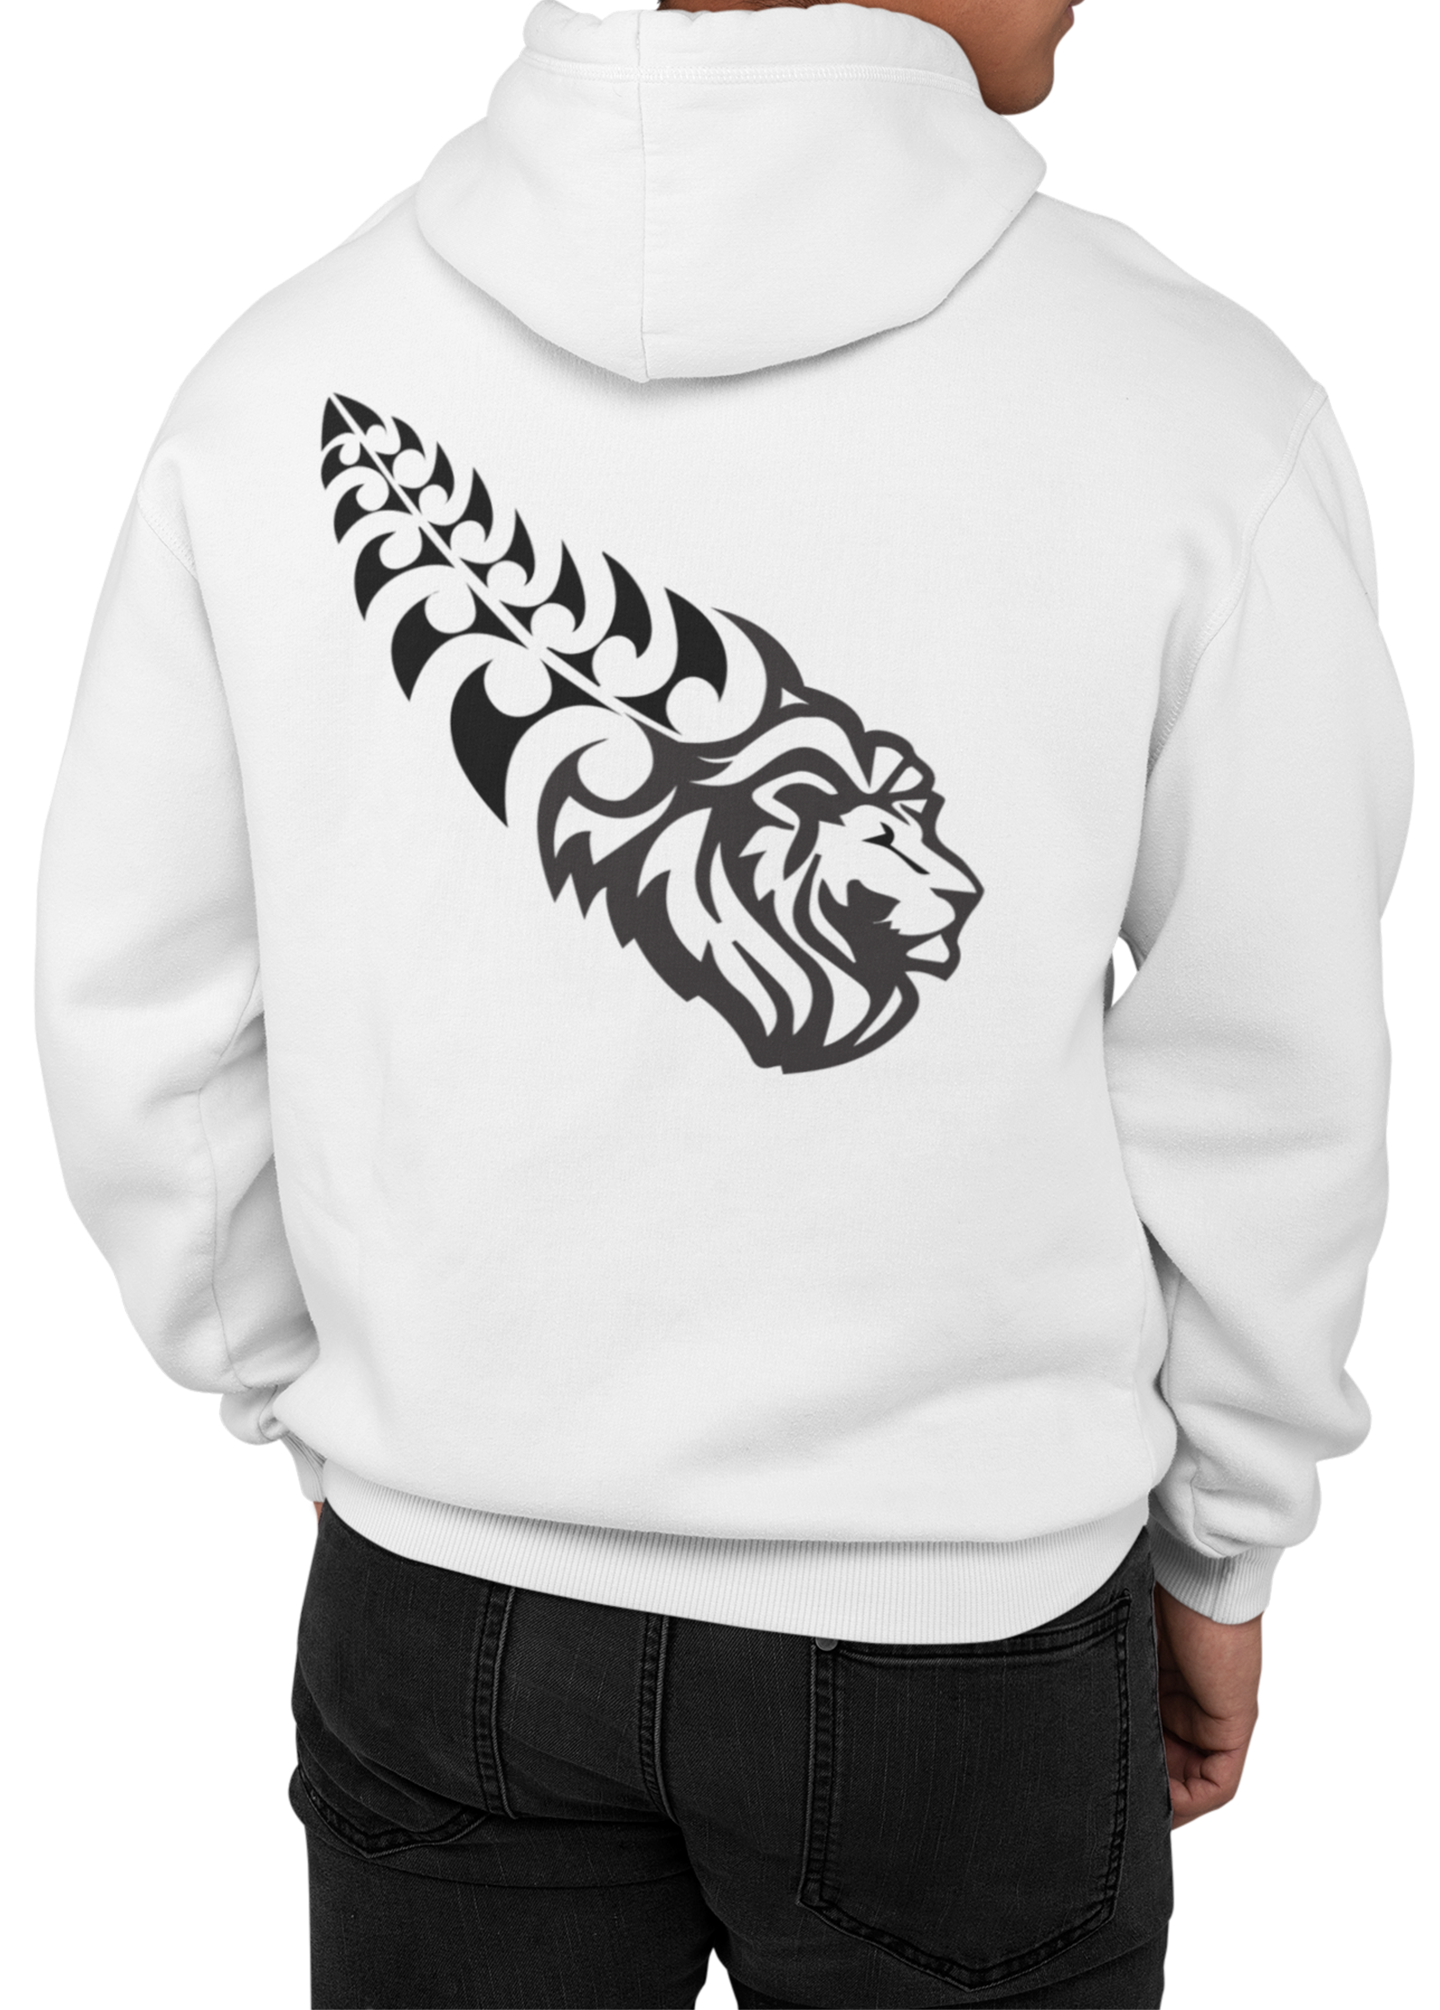 The Lion hoodie